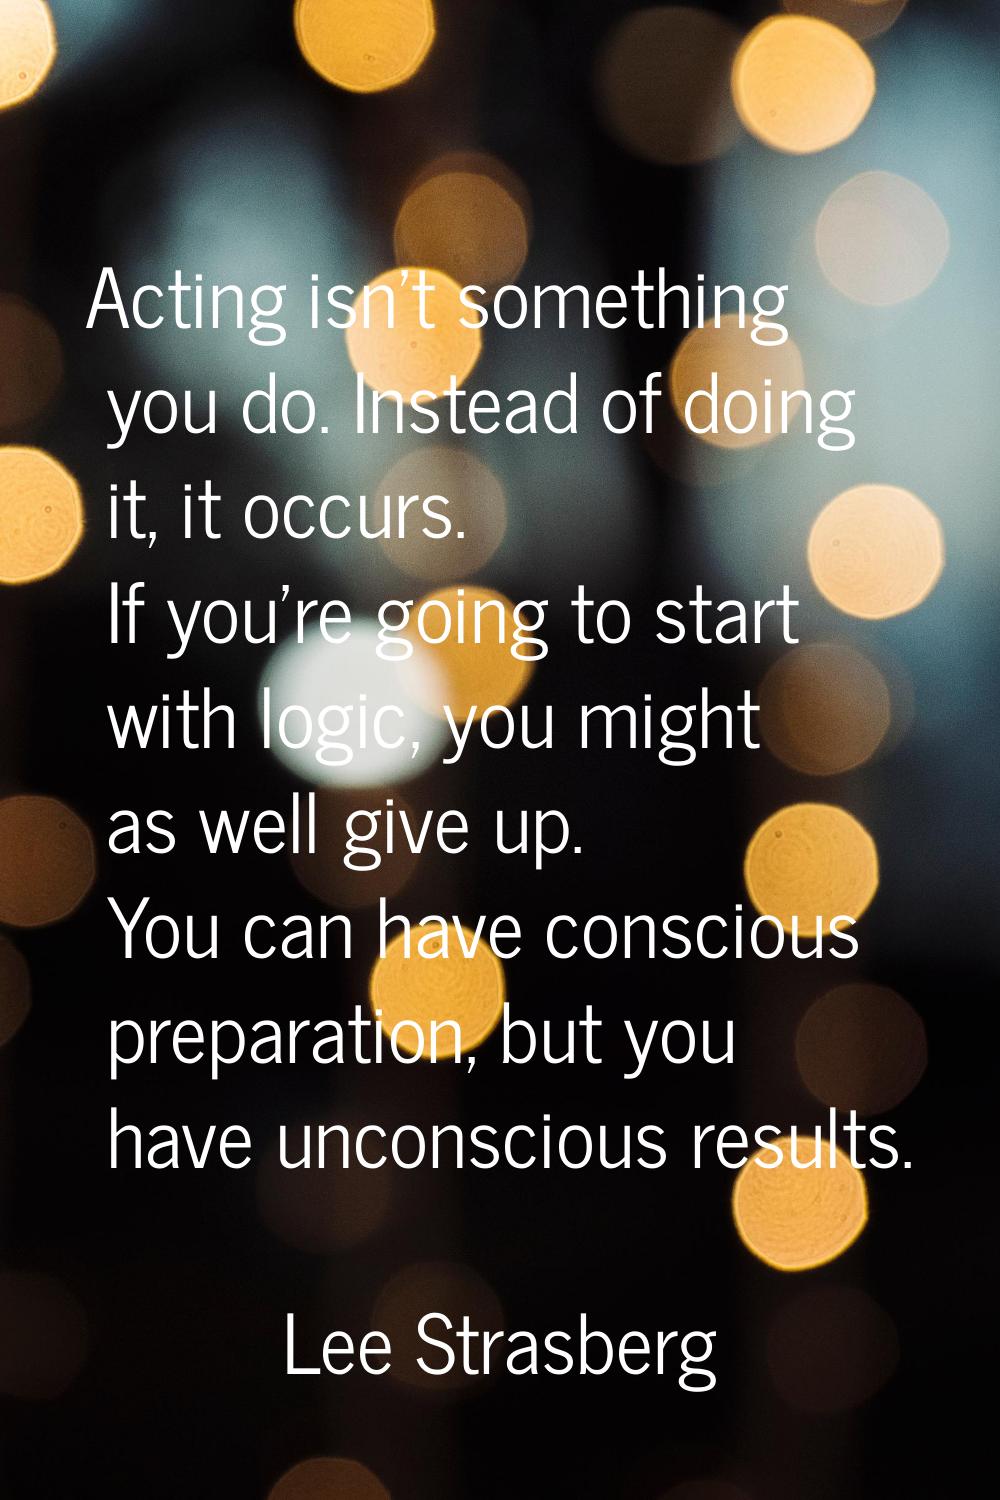 Acting isn't something you do. Instead of doing it, it occurs. If you're going to start with logic,